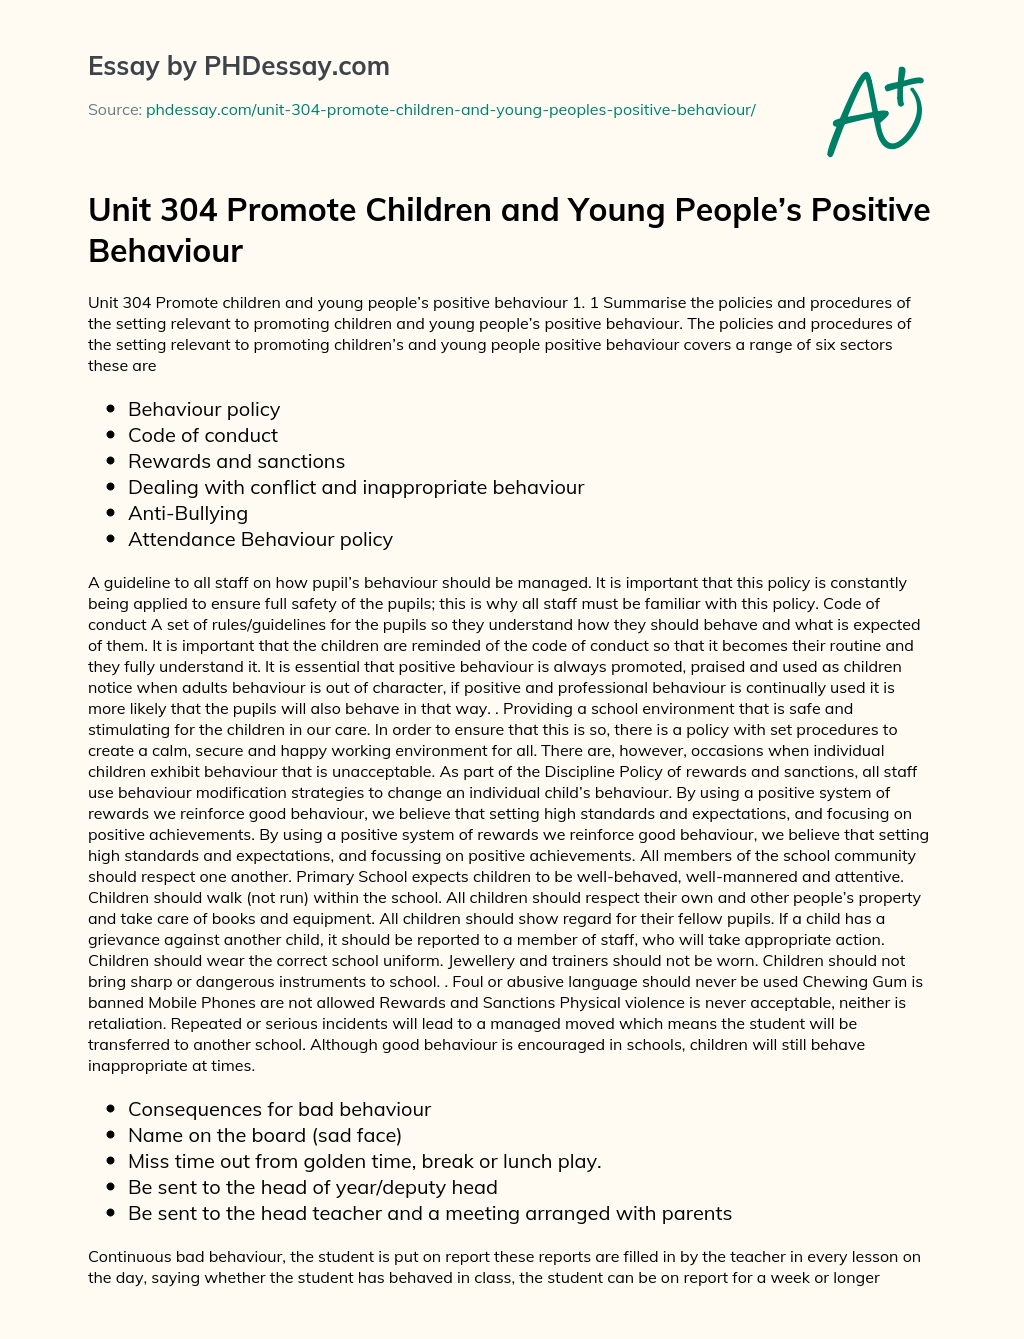 Promote Children and Young People’s Positive Behaviour essay